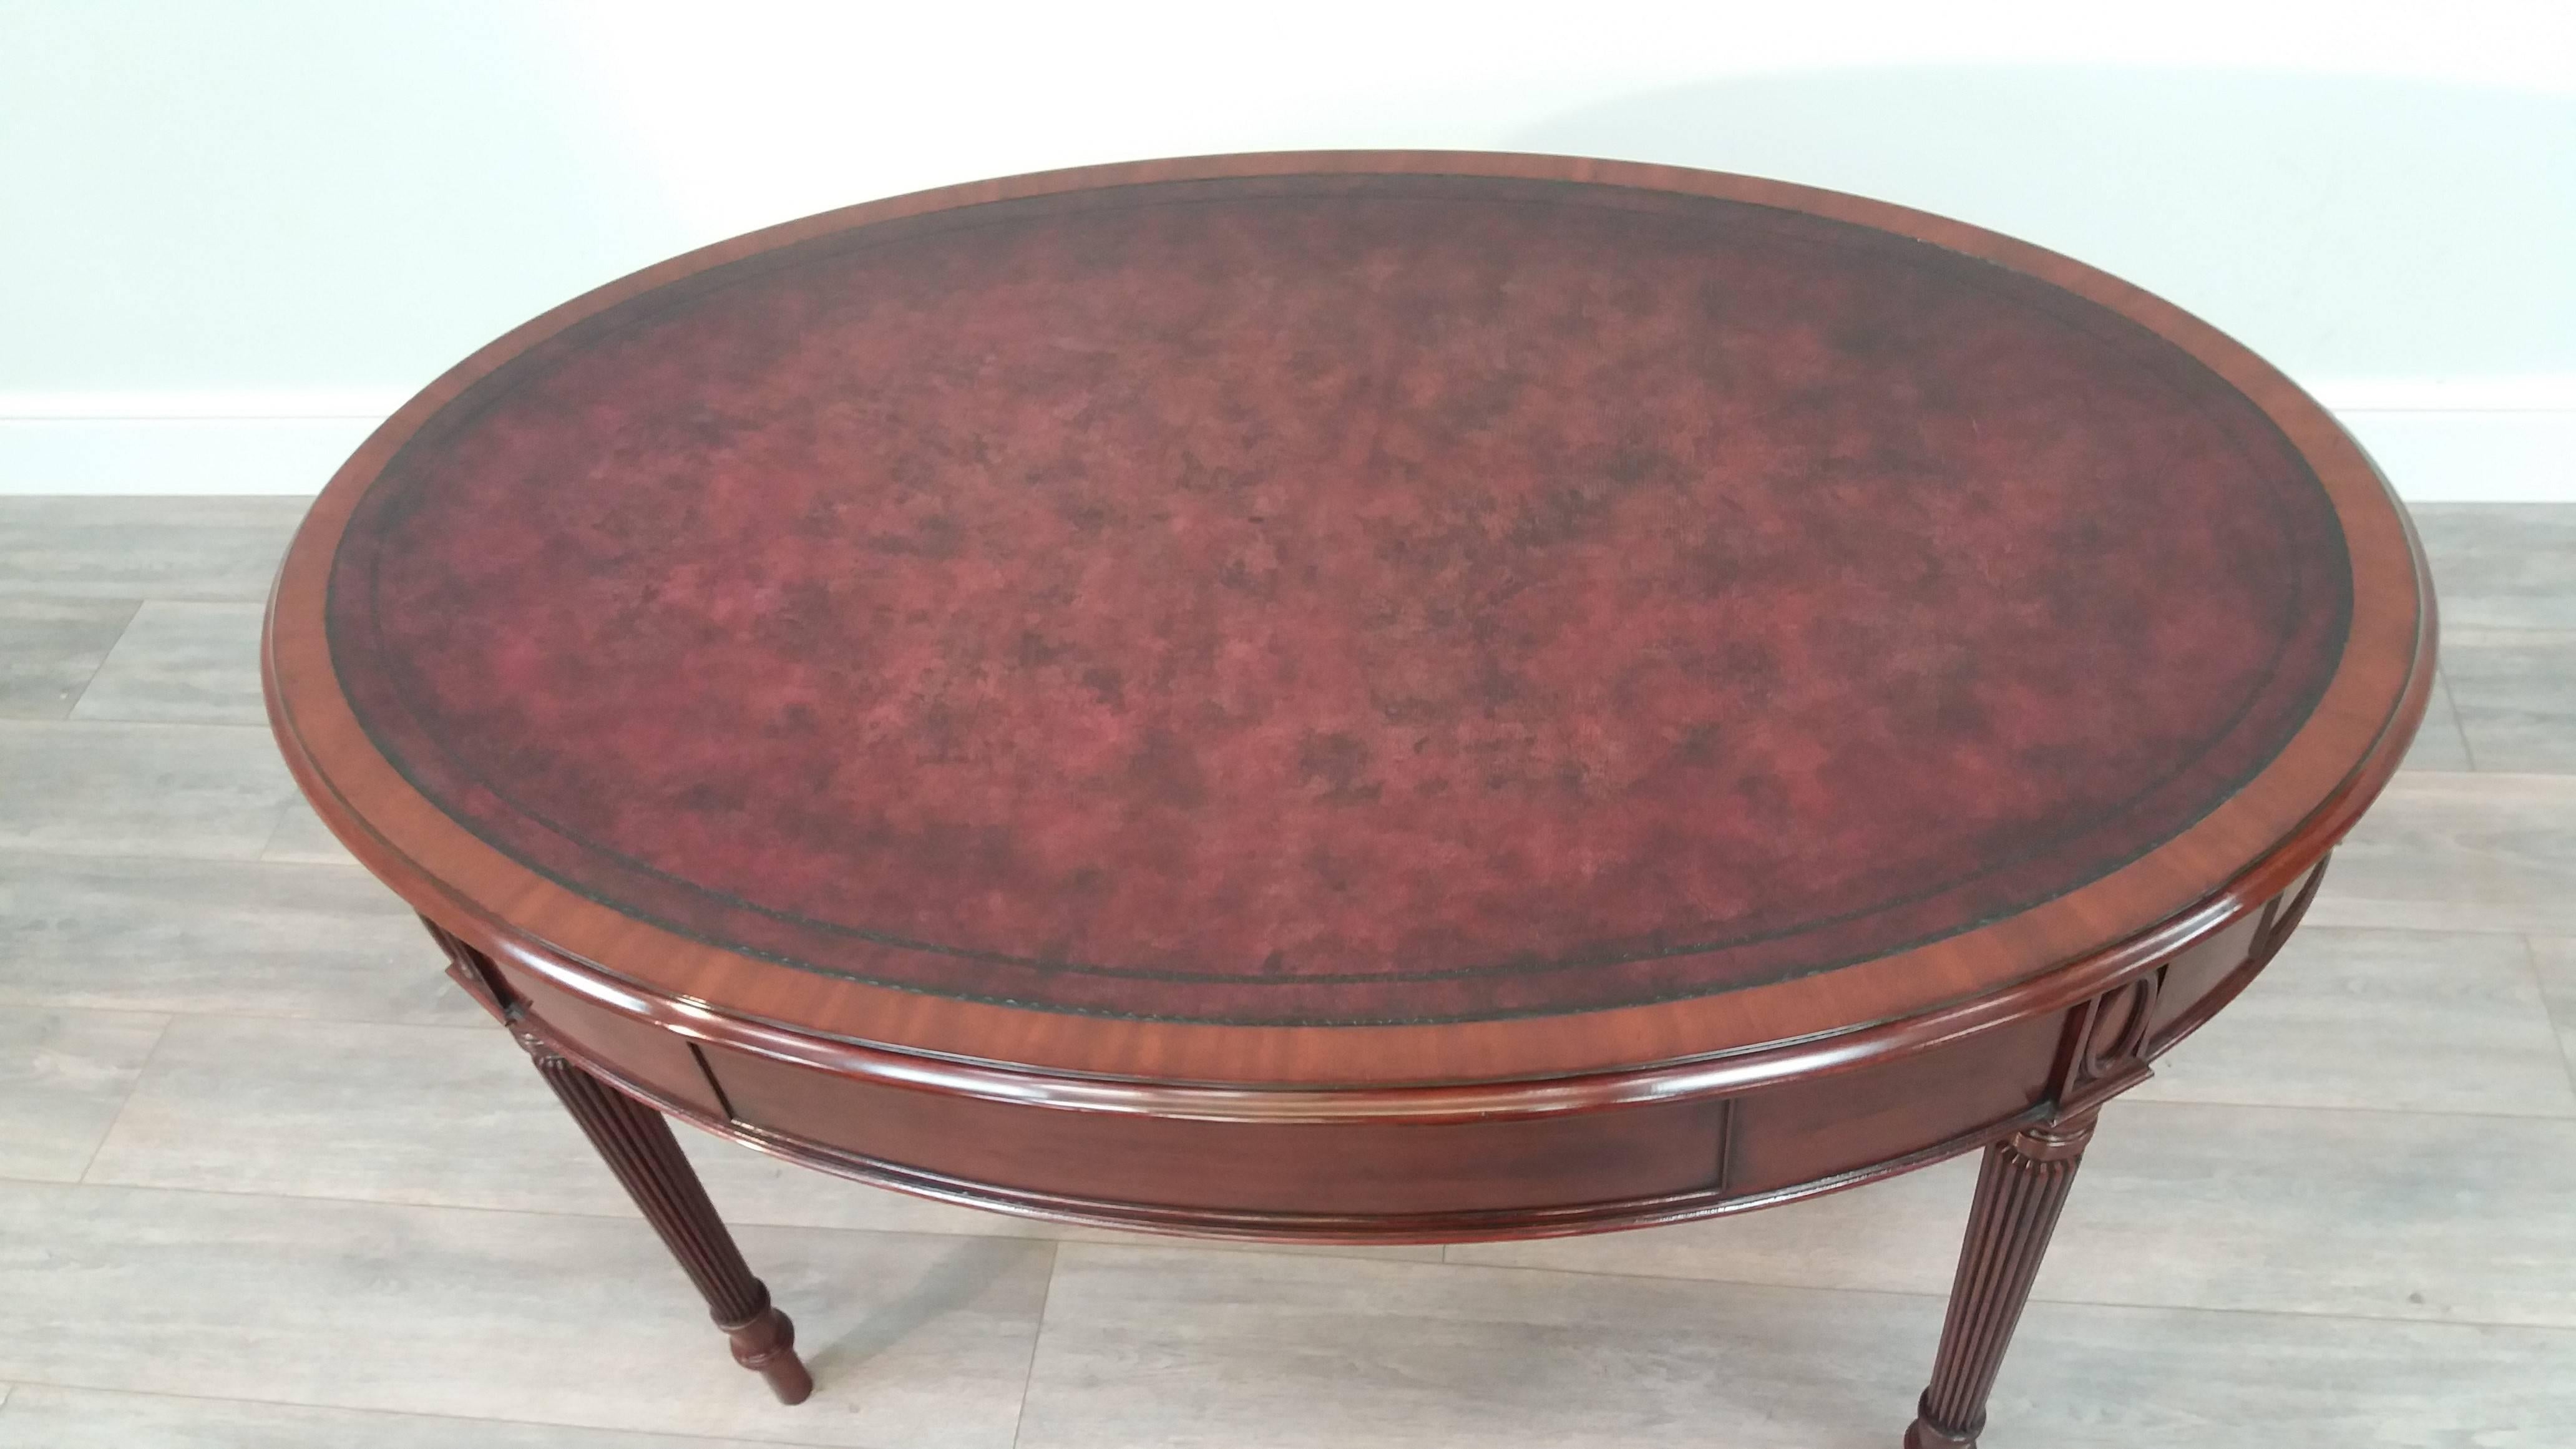 Hide Arthur Brett Regency-style Mahogany Oval Writing Table with Leather Top For Sale